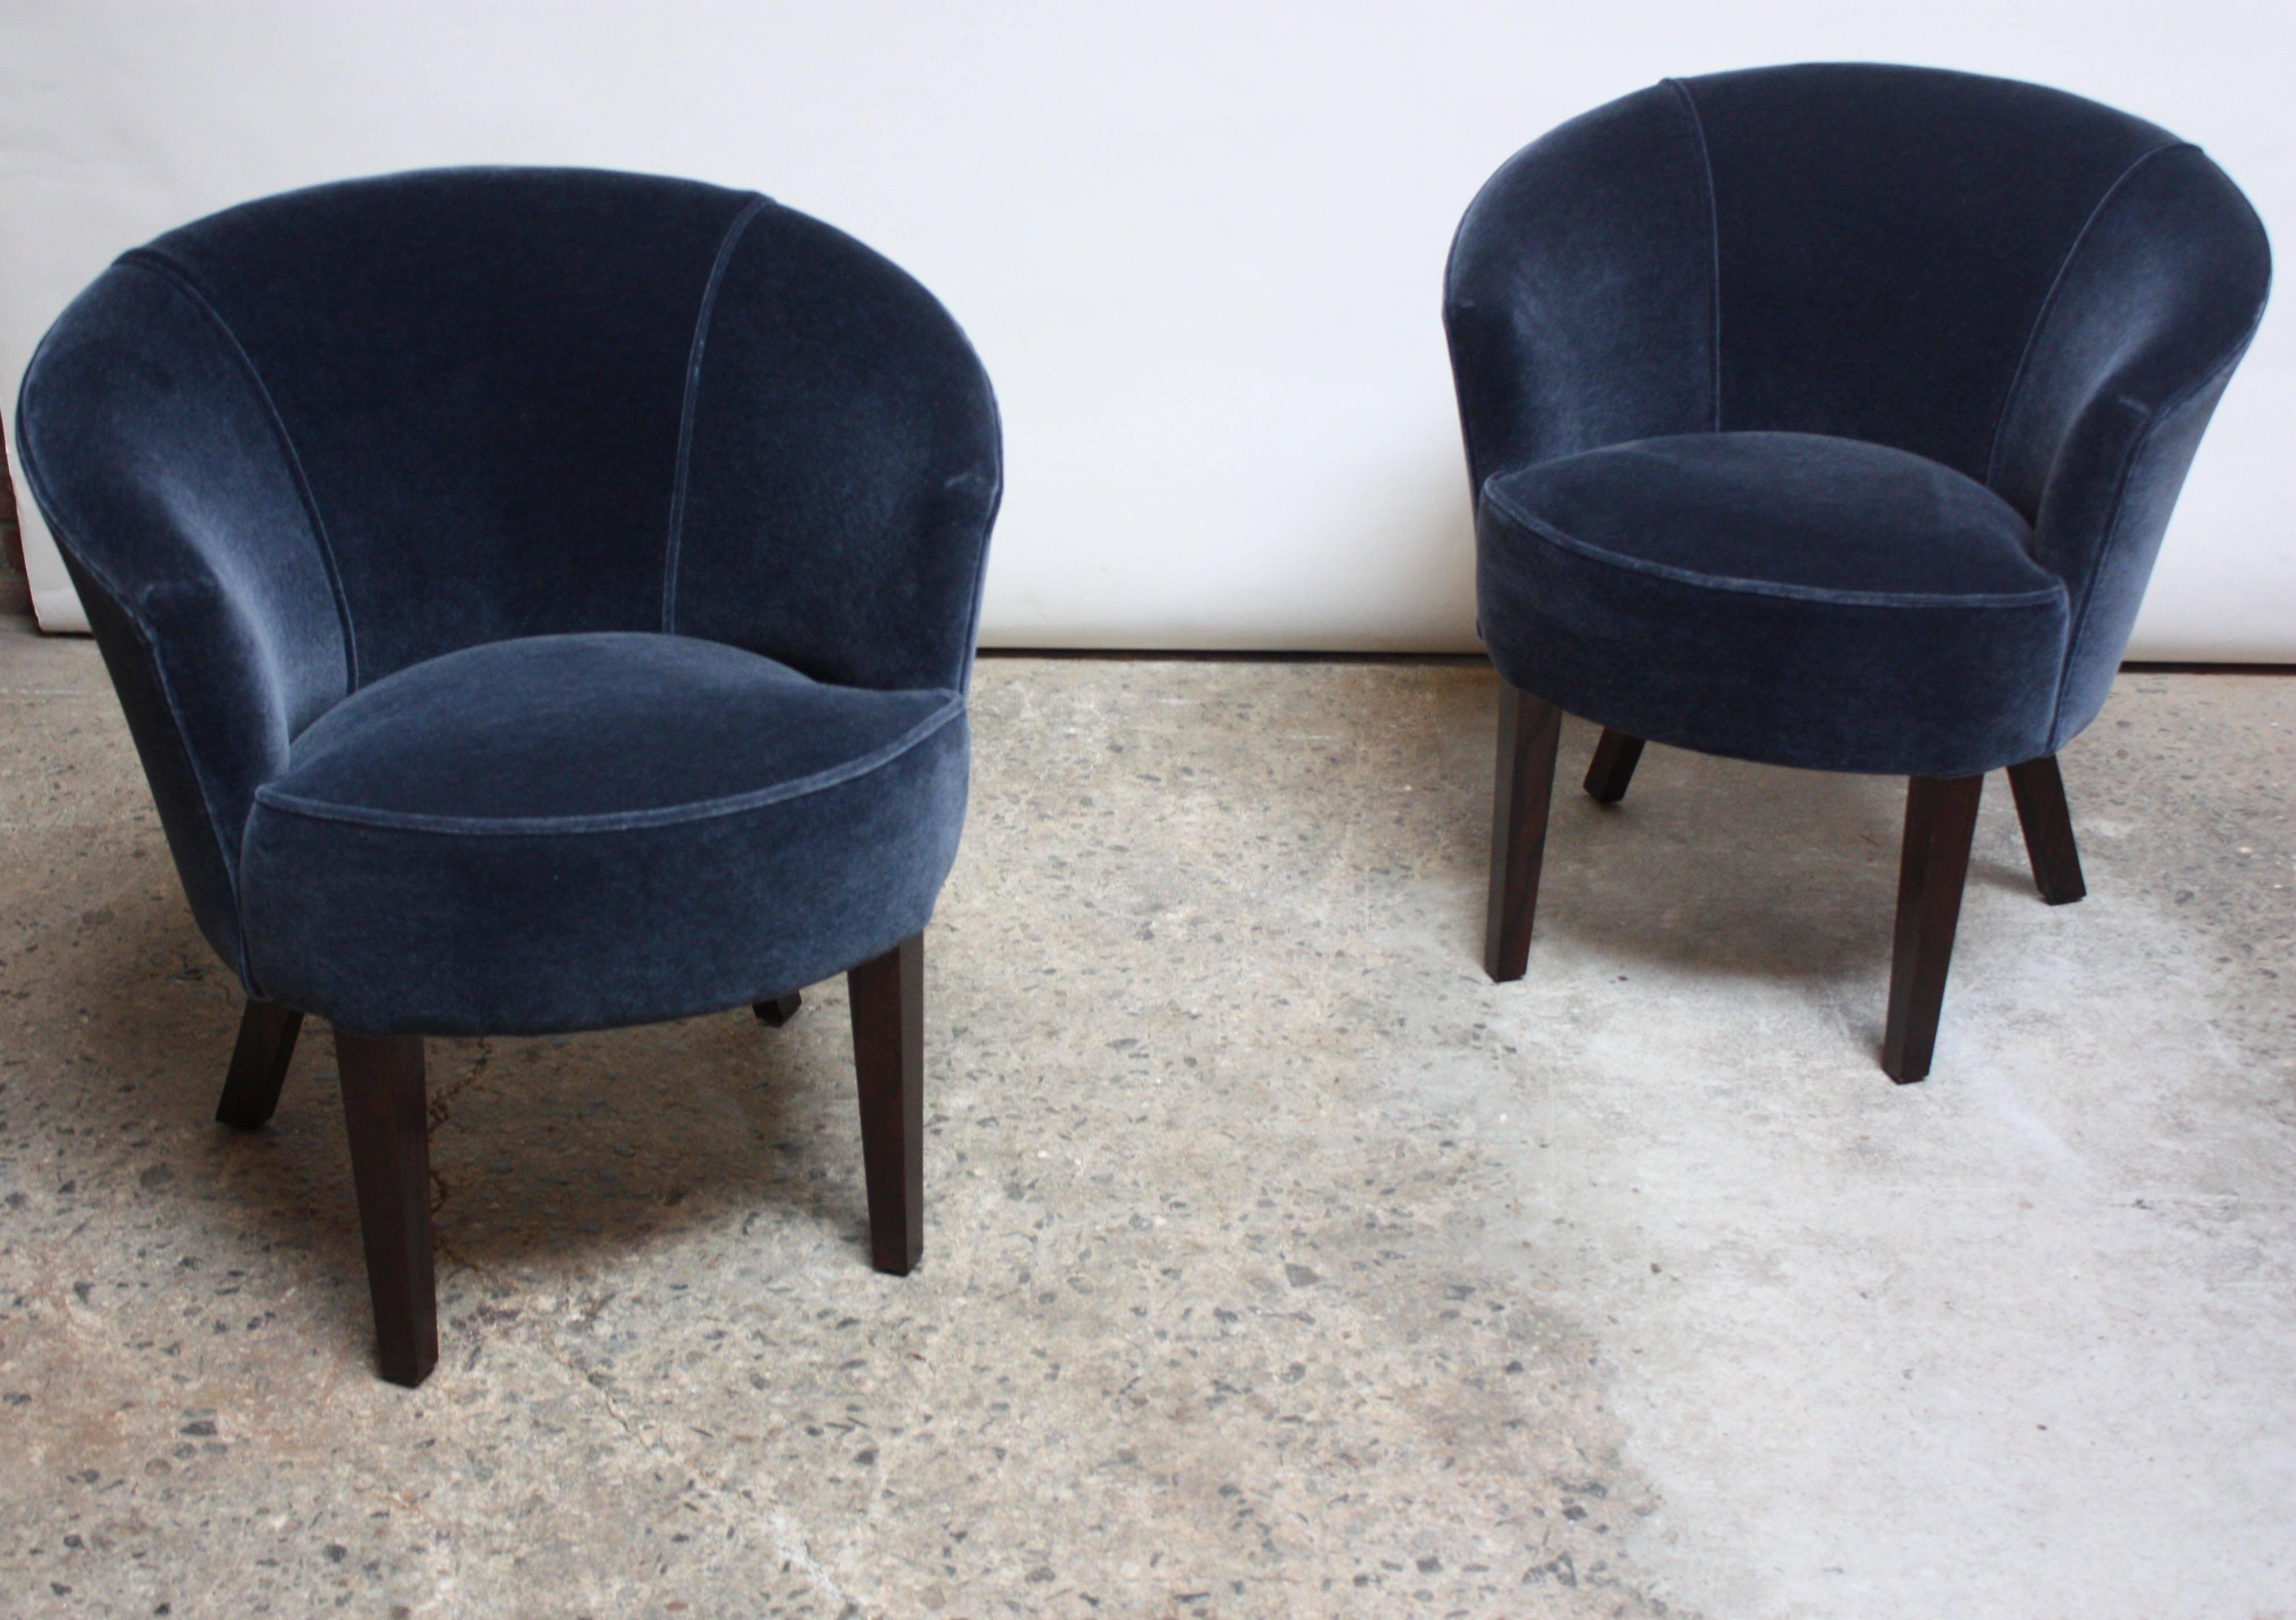 Contemporary Pair of English George Smith 'Petworth' Tub Chairs in Mohair